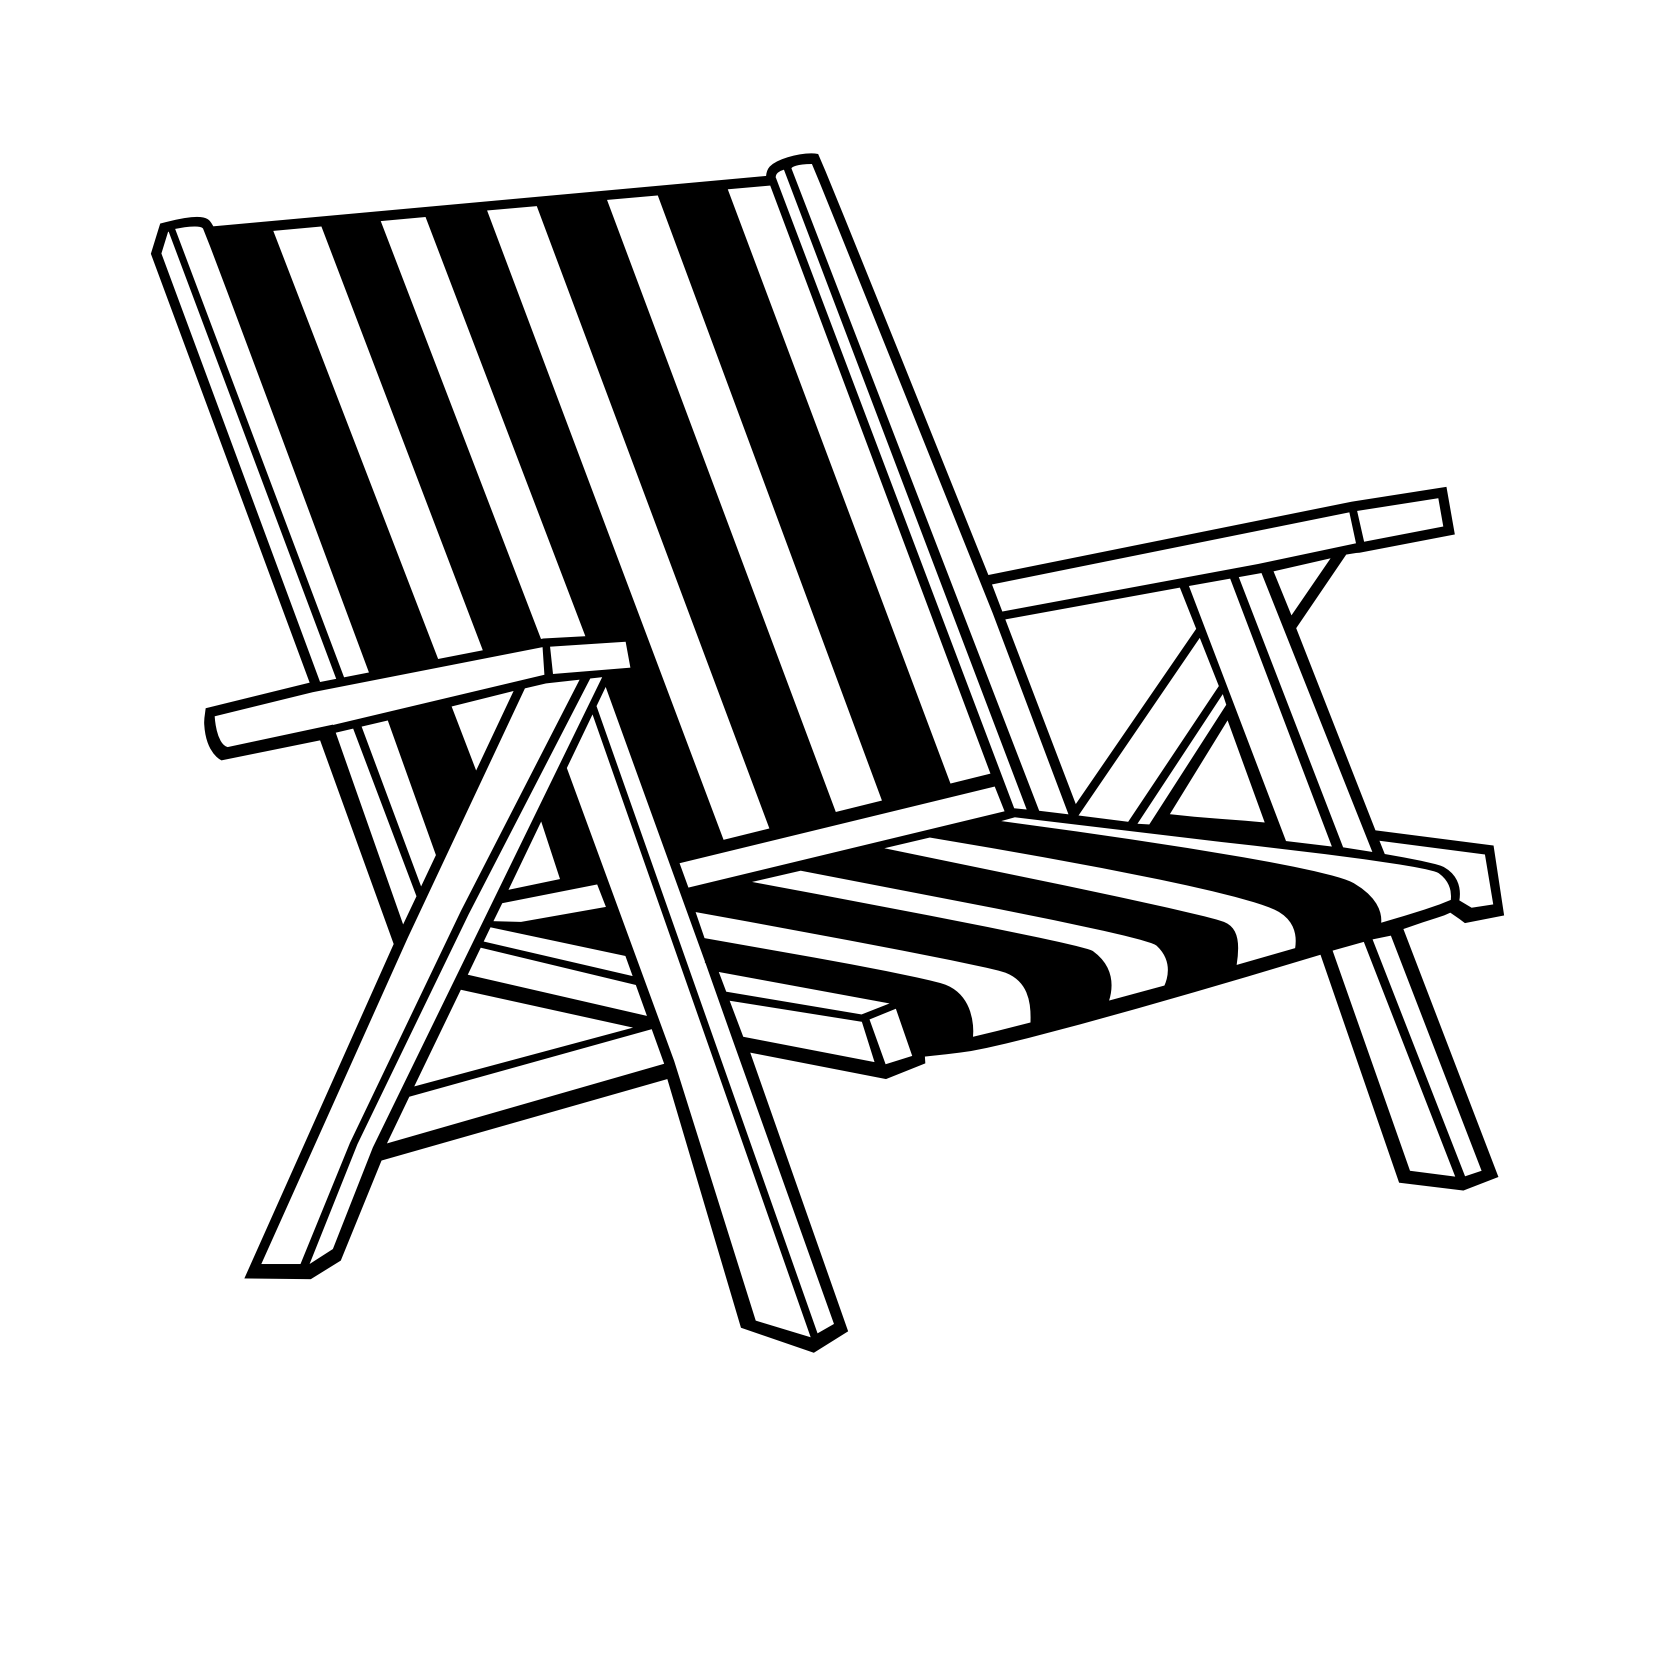 Chair Coloring Pages - Coloring Home